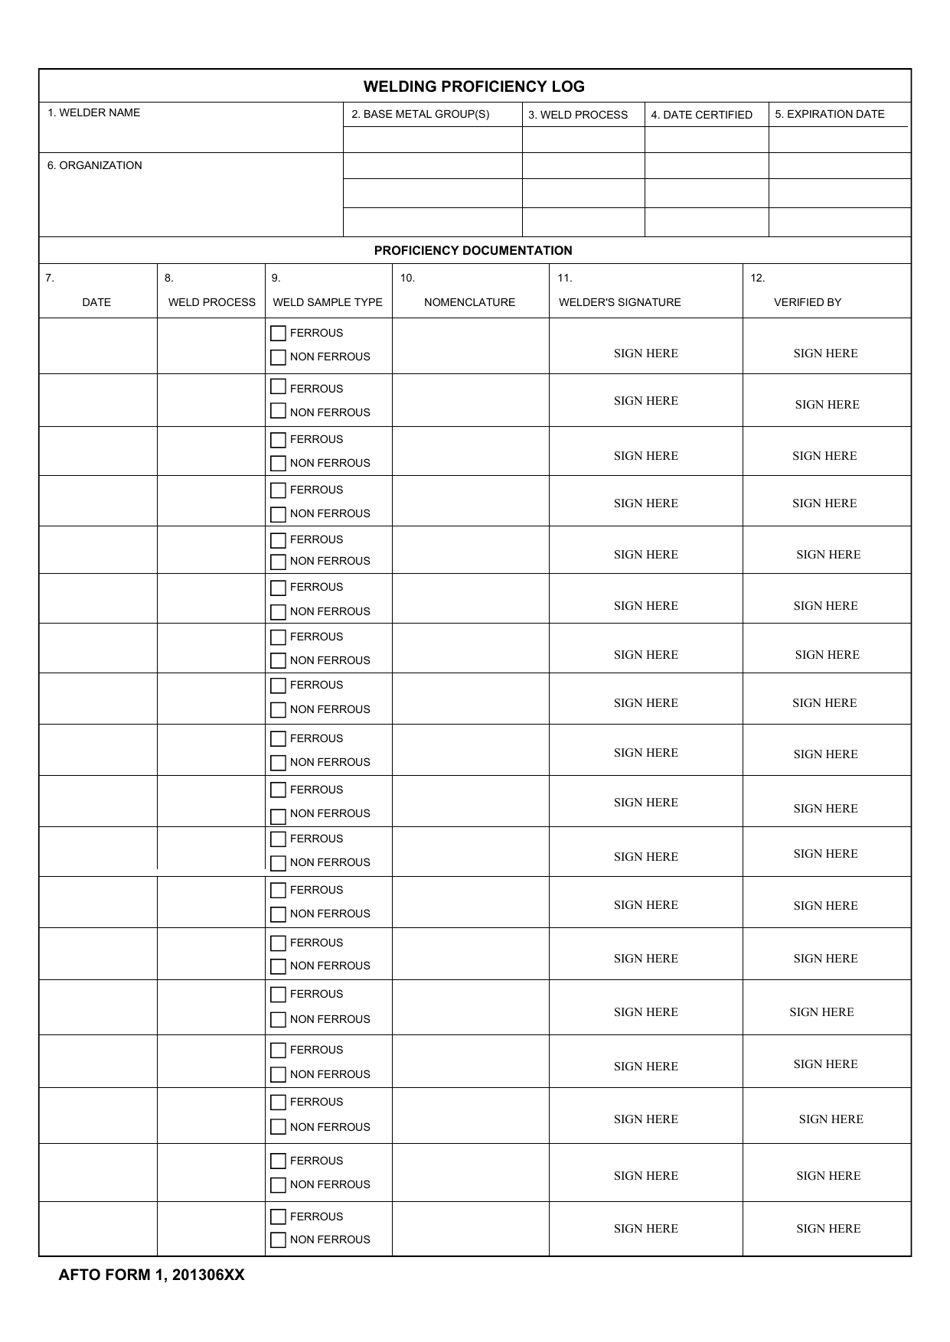 AFTO Form 1 Welding Proficiency Log, Page 1